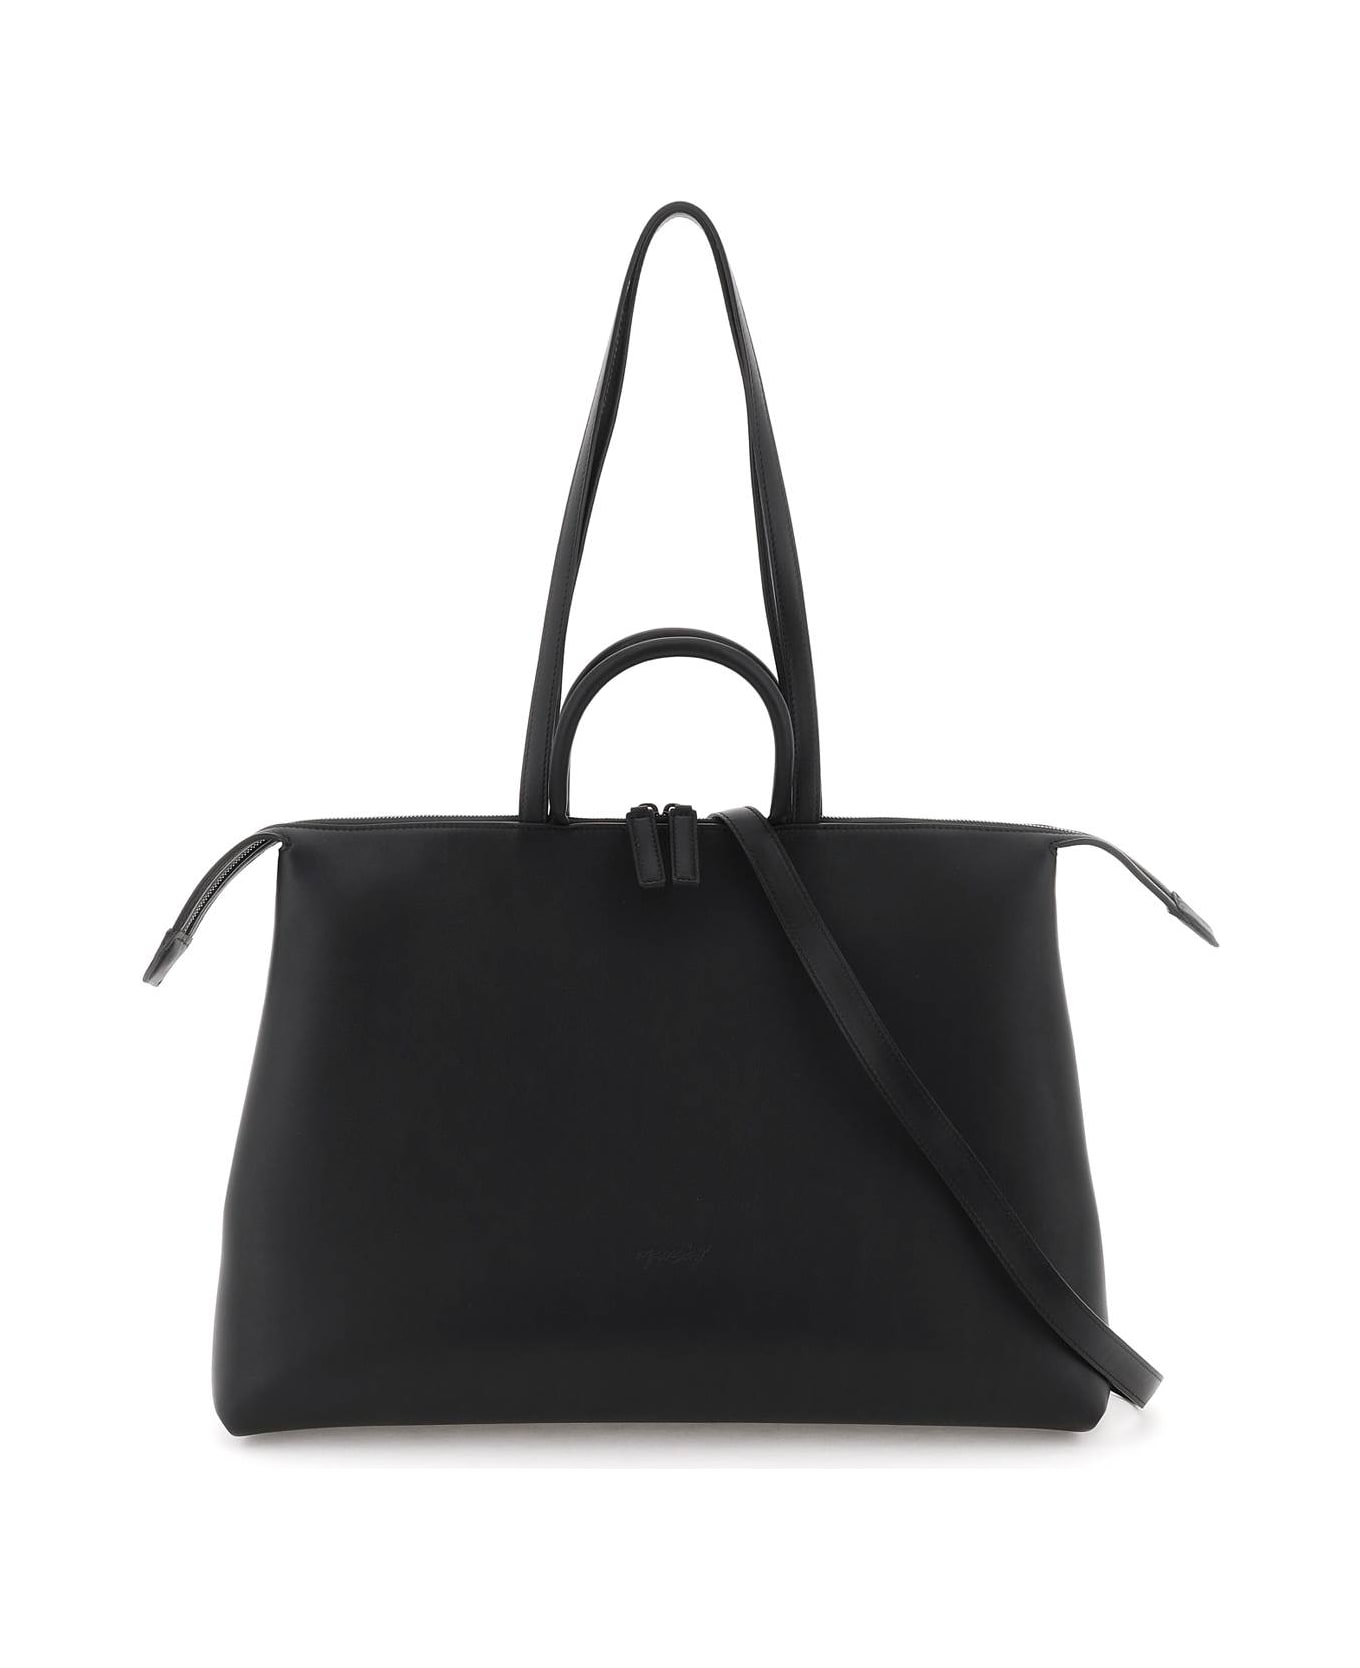 Marsell '4 In Orizzontale' Shoulder Bag - NERO (Black) トートバッグ